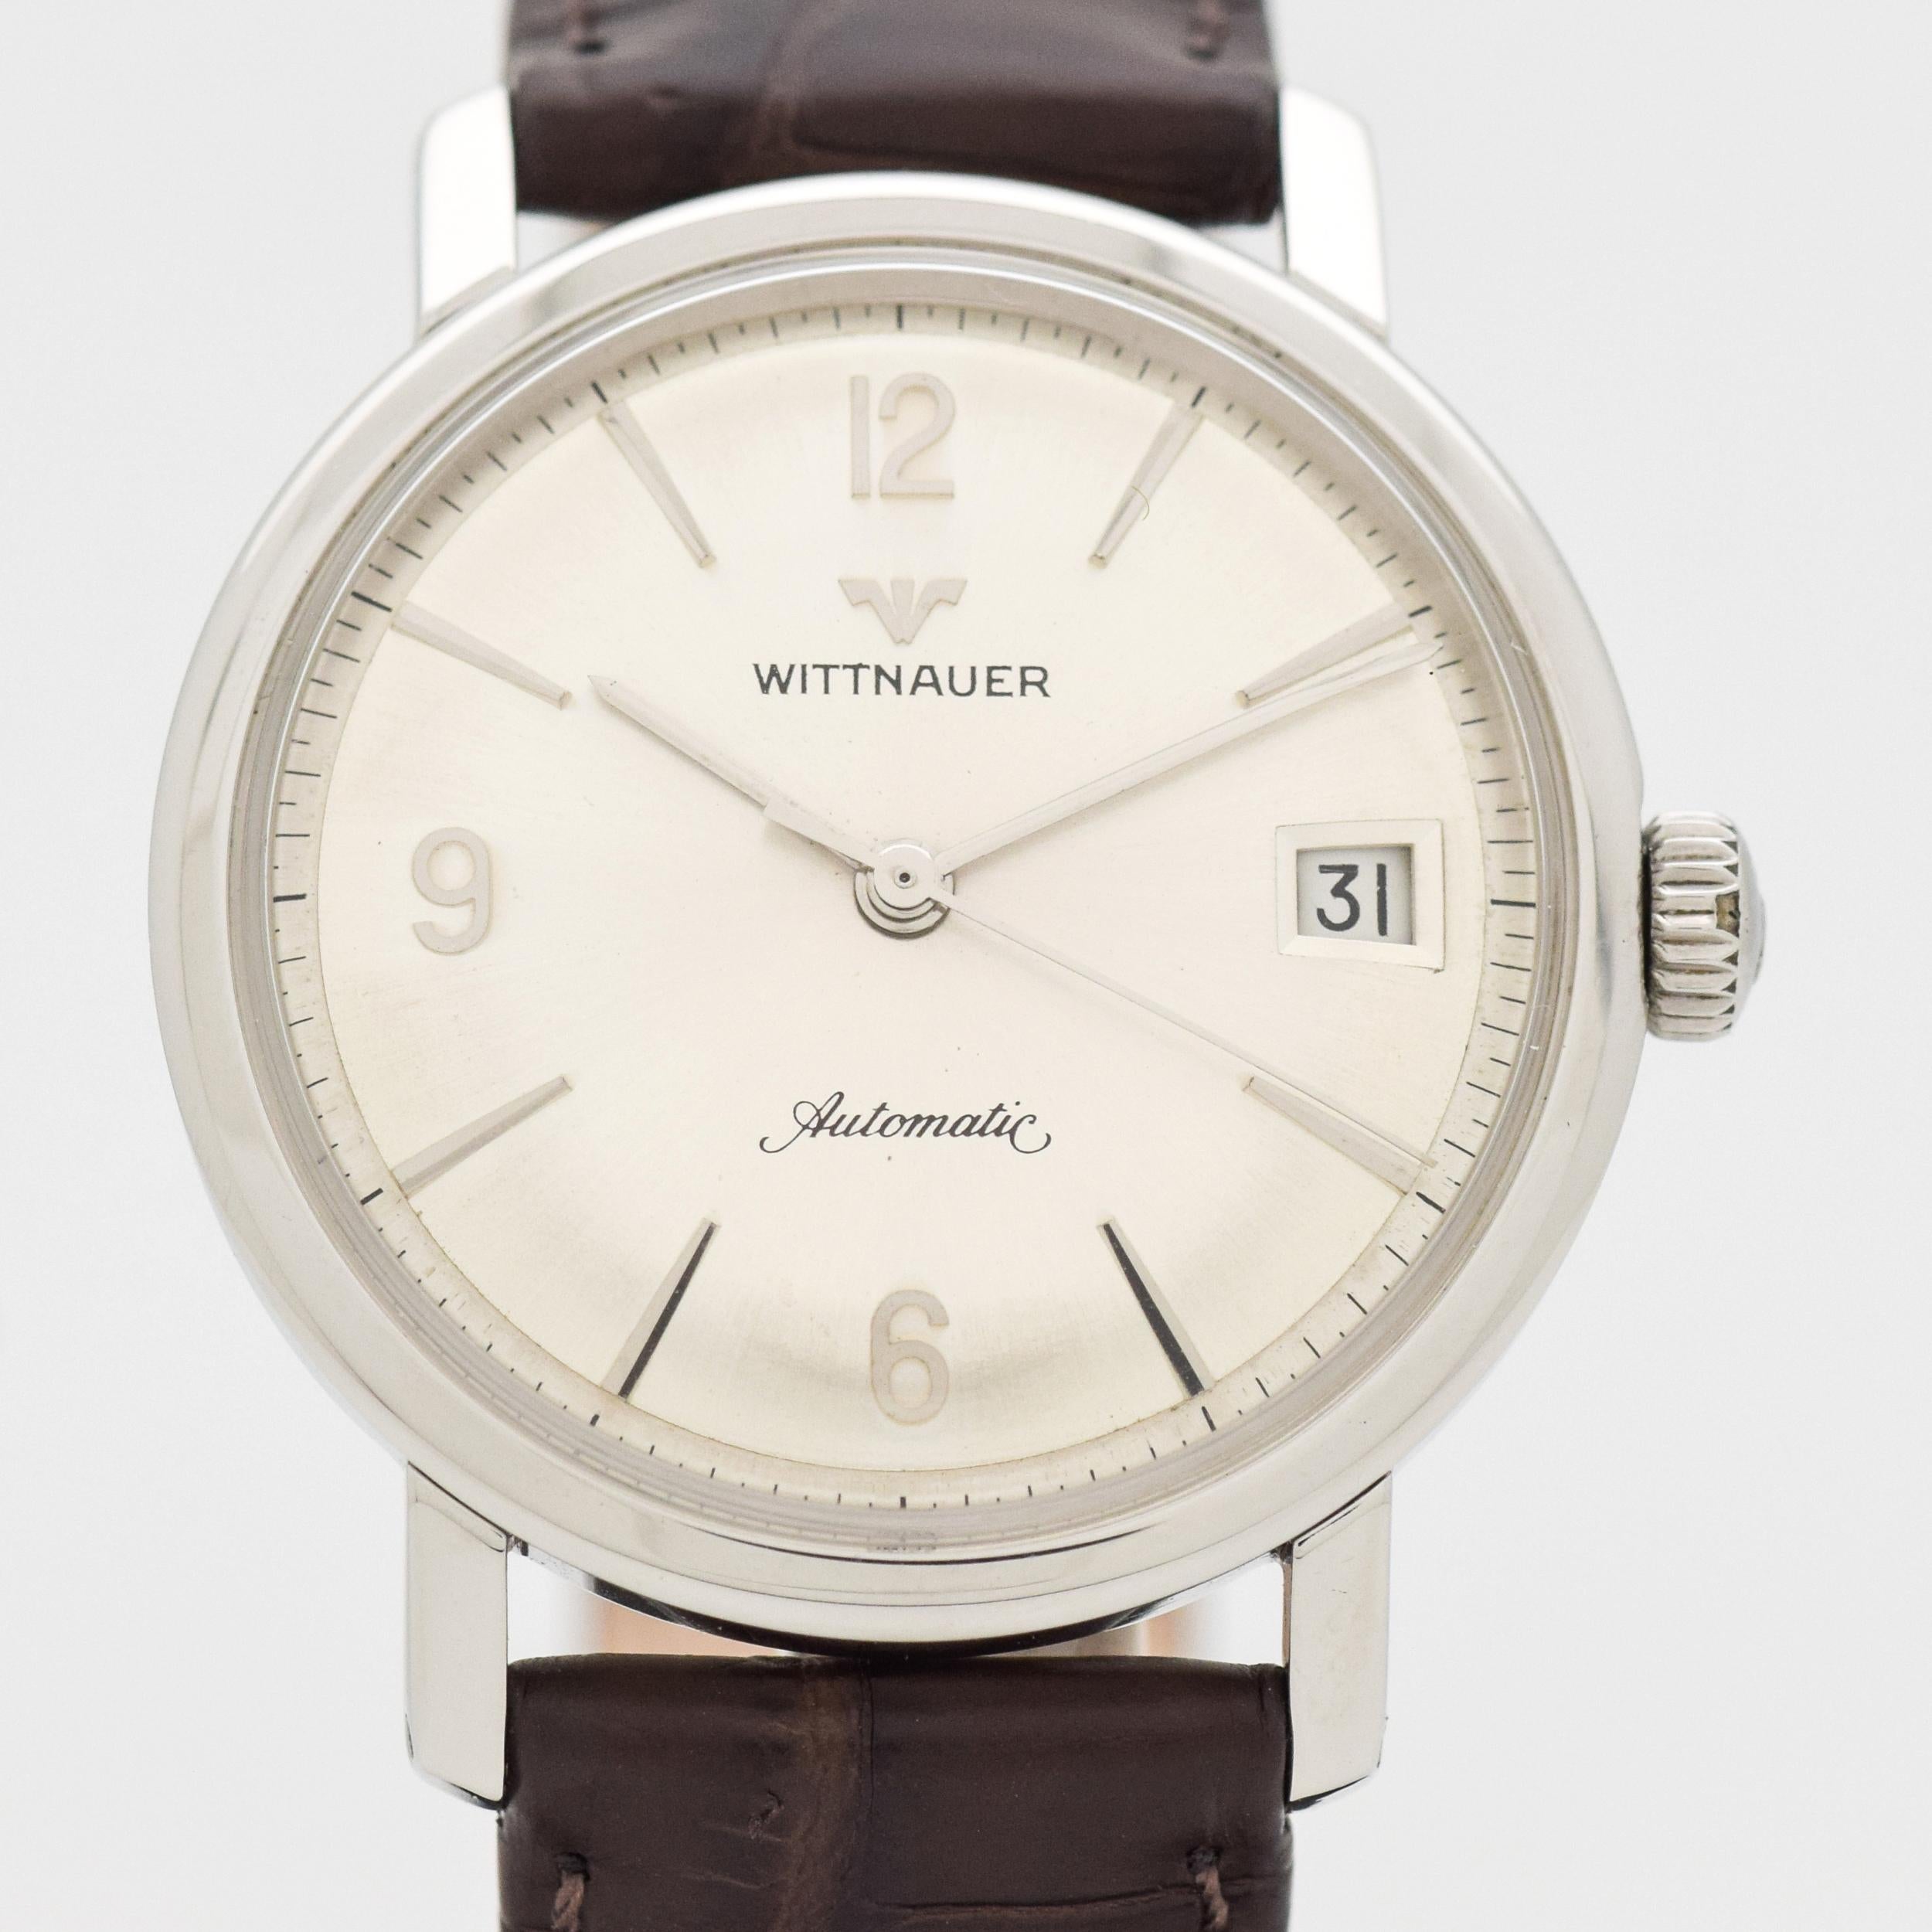 1960's Vintage Wittnauer Automatic Reference 9002. Stainless Steel Case. 34mm wide. Silver dial with applied, Arabic numerals & bar markers. Powered by a 17-jewel, automatic caliber movement. Triple Signed. Swiss-made.